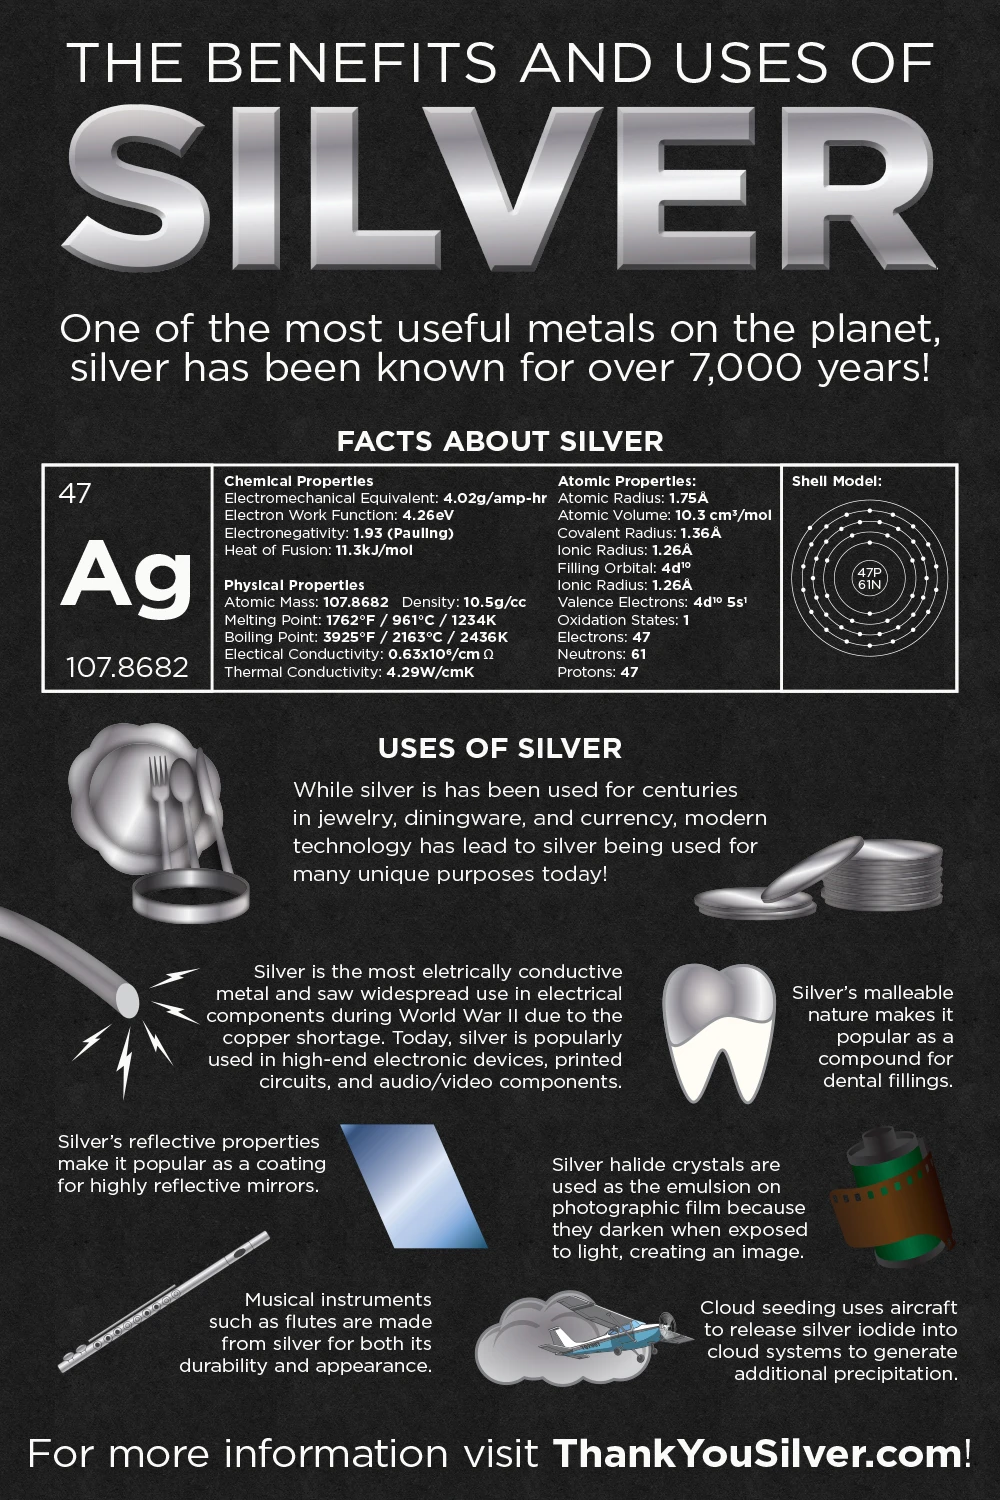 silver's uses and benefits